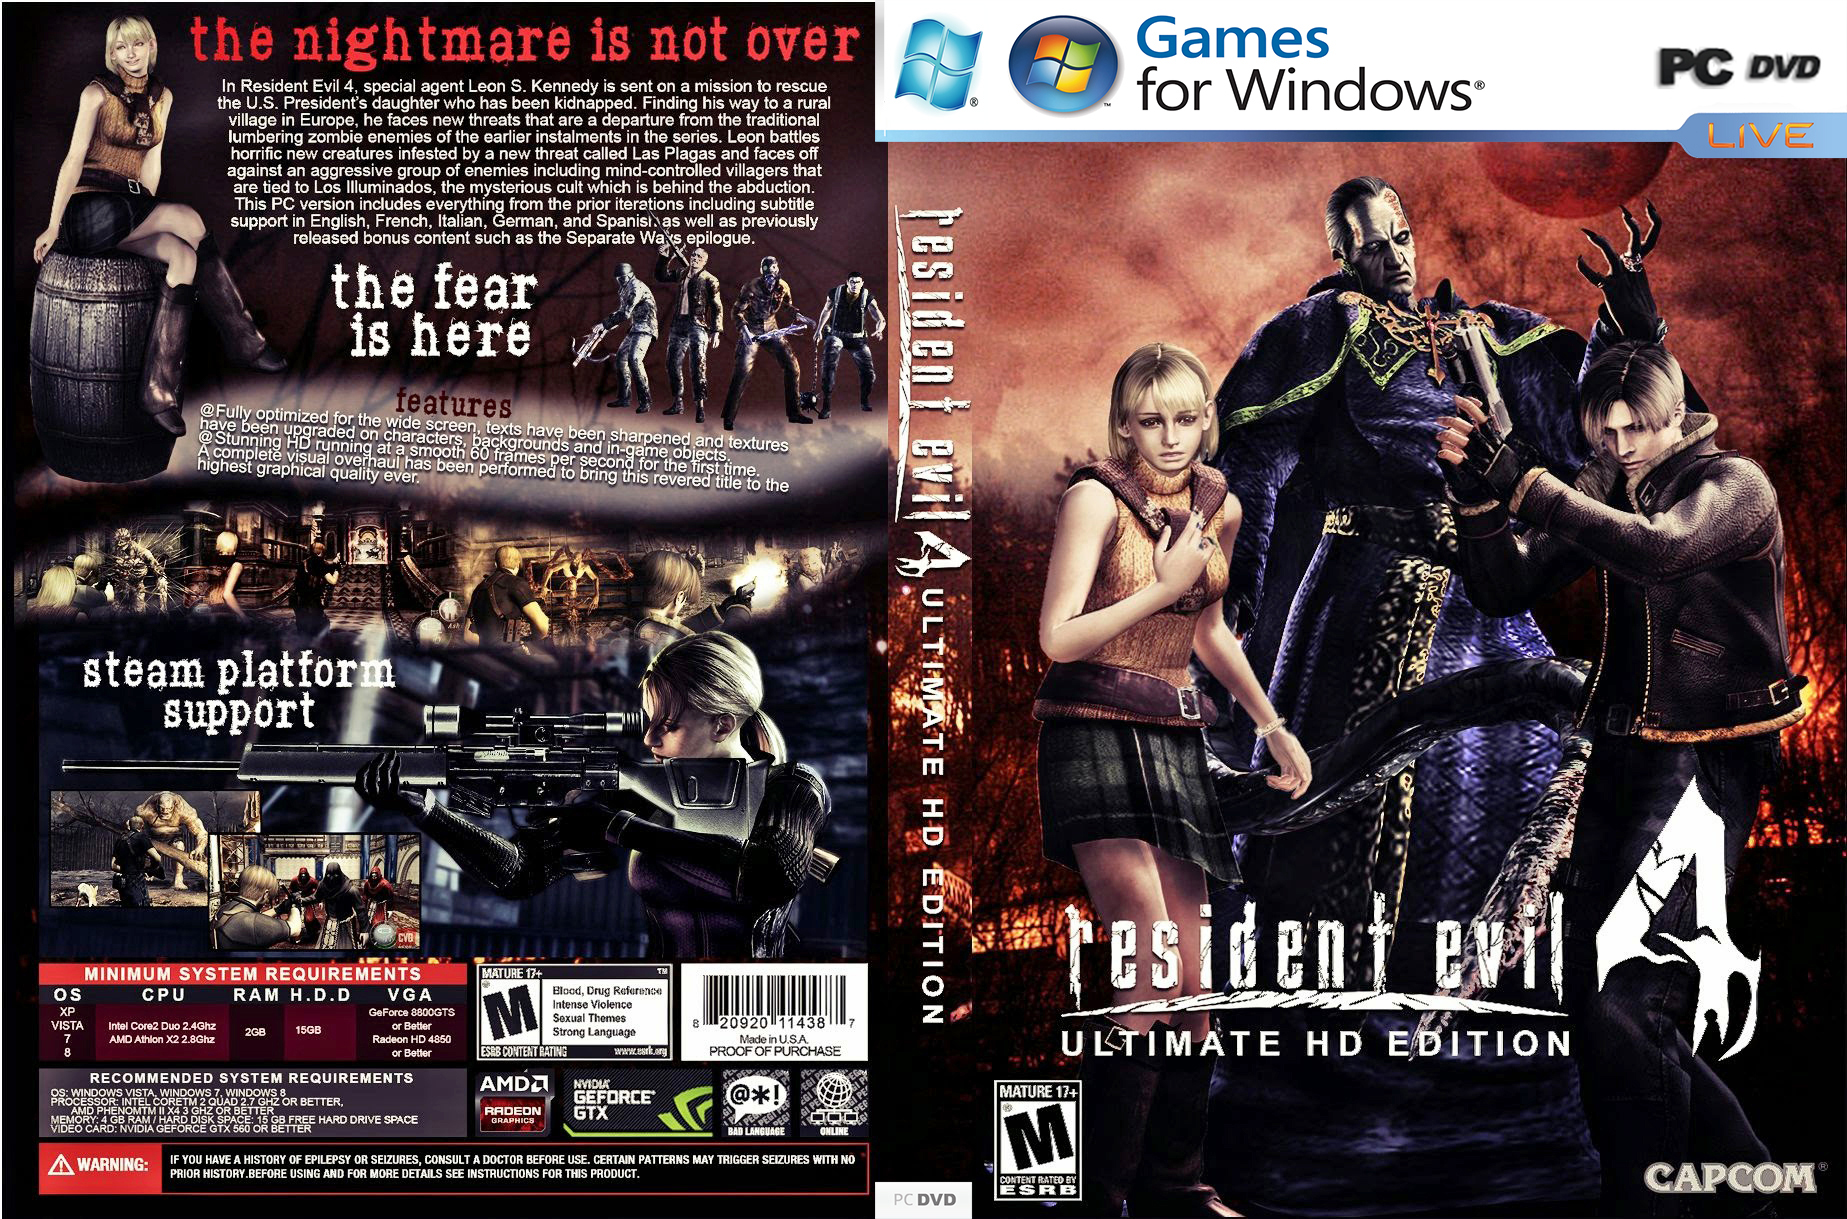 Resident Evil 4 Ultimate HD Edition PC GAME Offline INSTALLATION Lazada